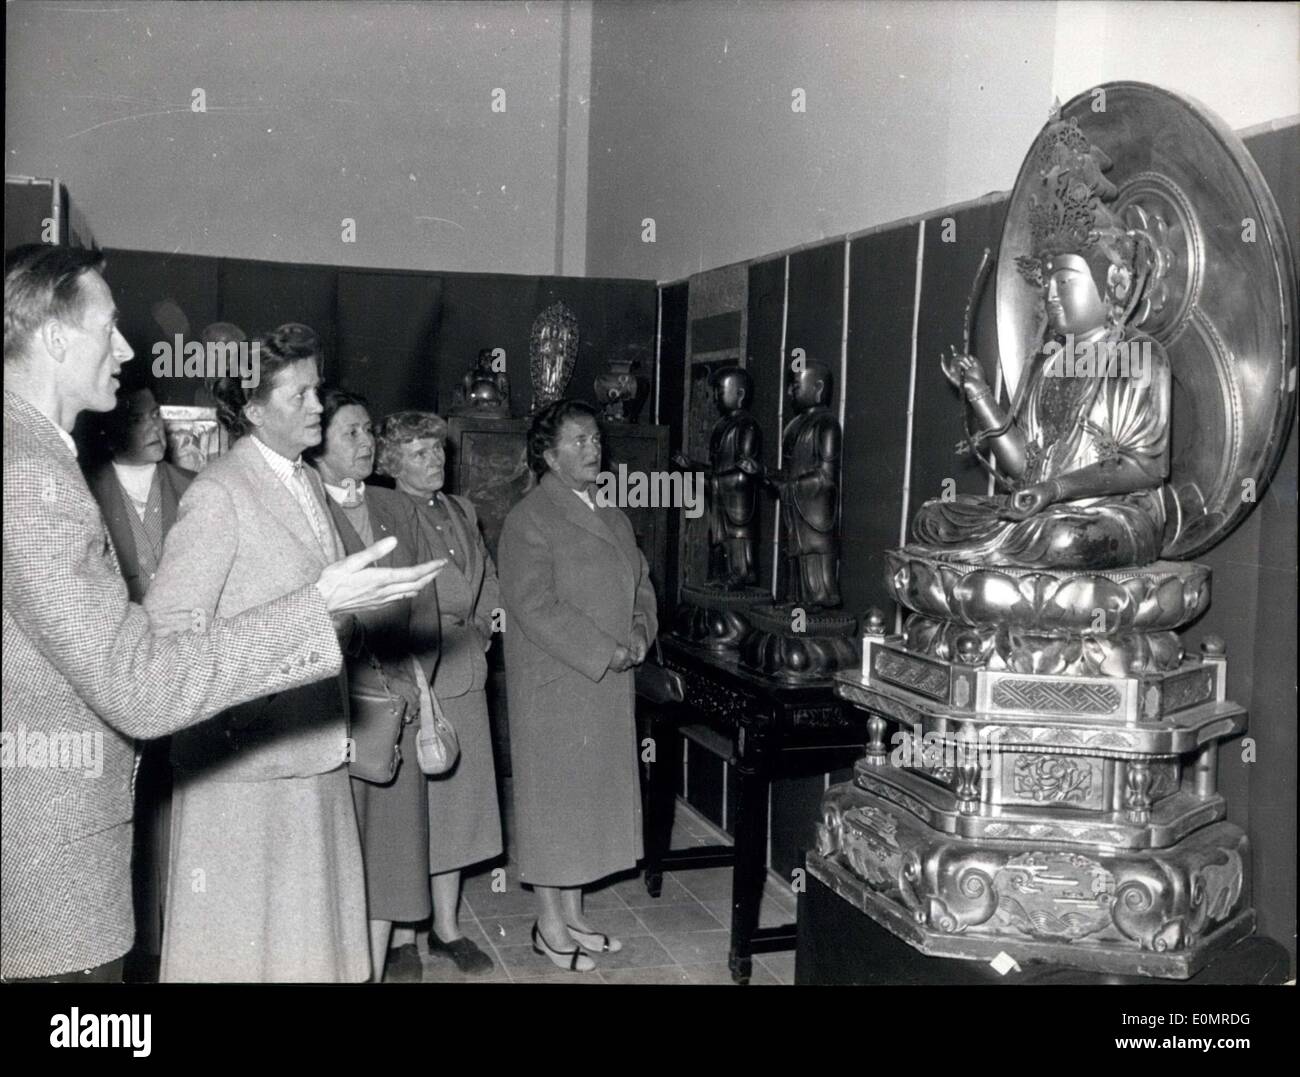 Jun. 02, 1956 - One of the biggest collection of Asia Art: At Frankenau near Kassel, the editor Anton Exner (44) (Anton Exner) opened a very extensive collection of Asiatic Art - everything he by himself brought back from his several Voyage to the far-east. Stock Photo